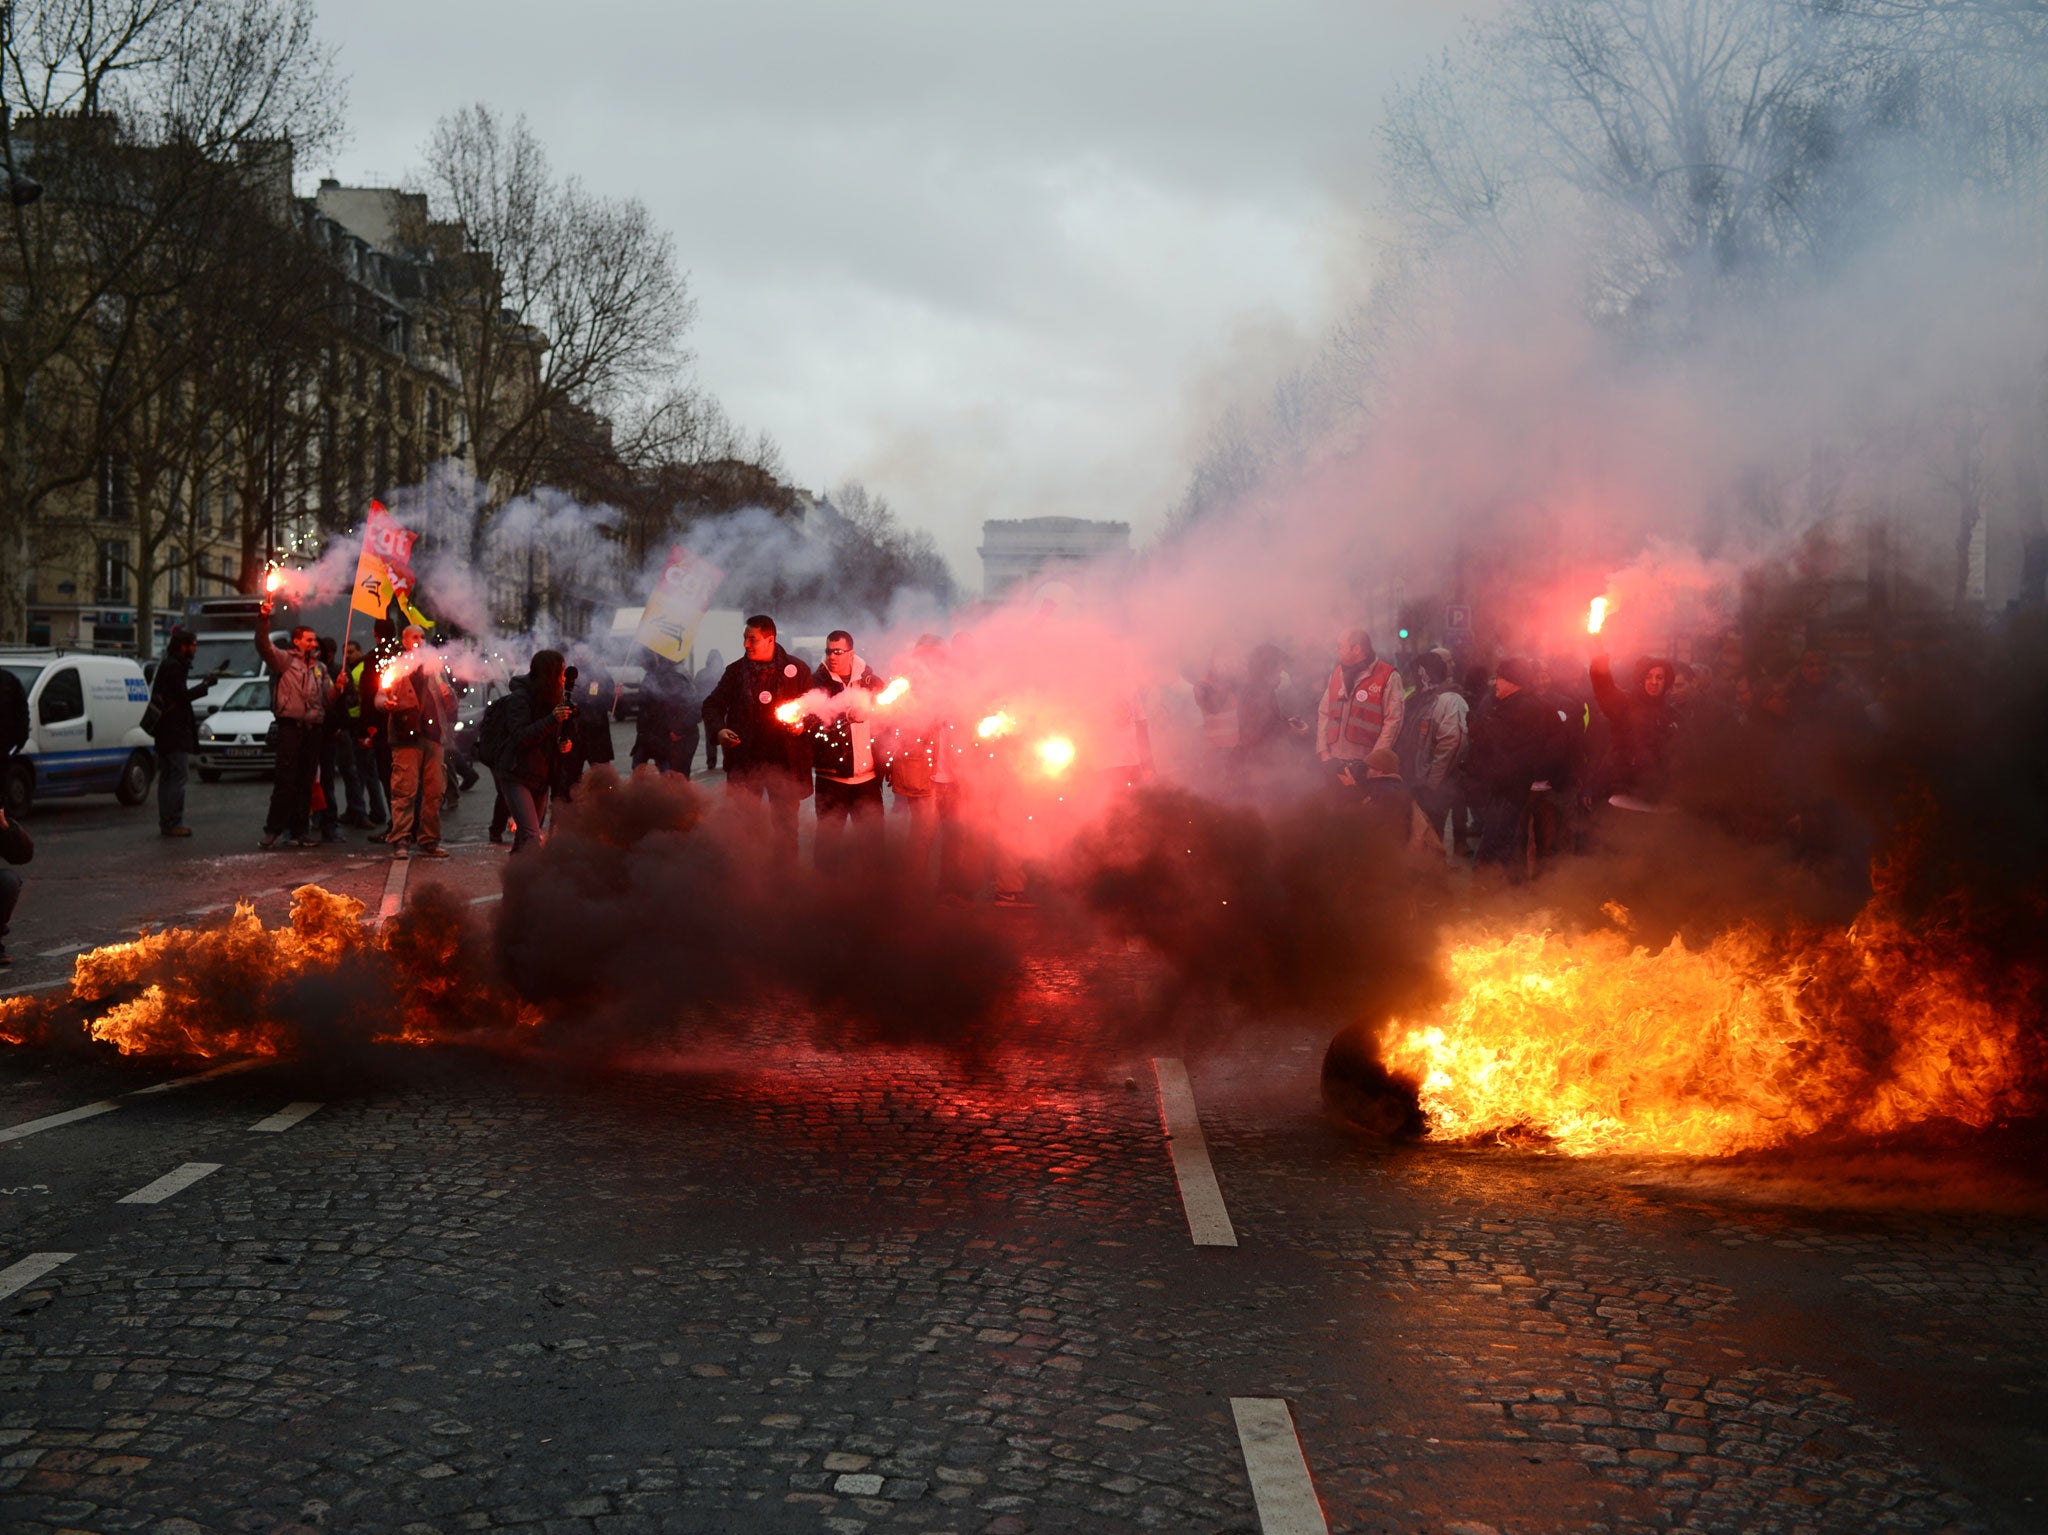 Employees of French auto giant PSA Peugeot Citroen Aulnay plant hold flares in front of fires on March 18, 2013, during a protest outside PSA headquarters in Paris, where an extraordinary central works council is held at the same time to present the group's restructuring plans to trade union representatives. This extraordianry council was focused upon the closure by 2014 of the group's plant in Aulnay-sous-Bois, currently providing 2,800 jobs, and upon the 1,400 jobcuts planned in its plant in Rennes